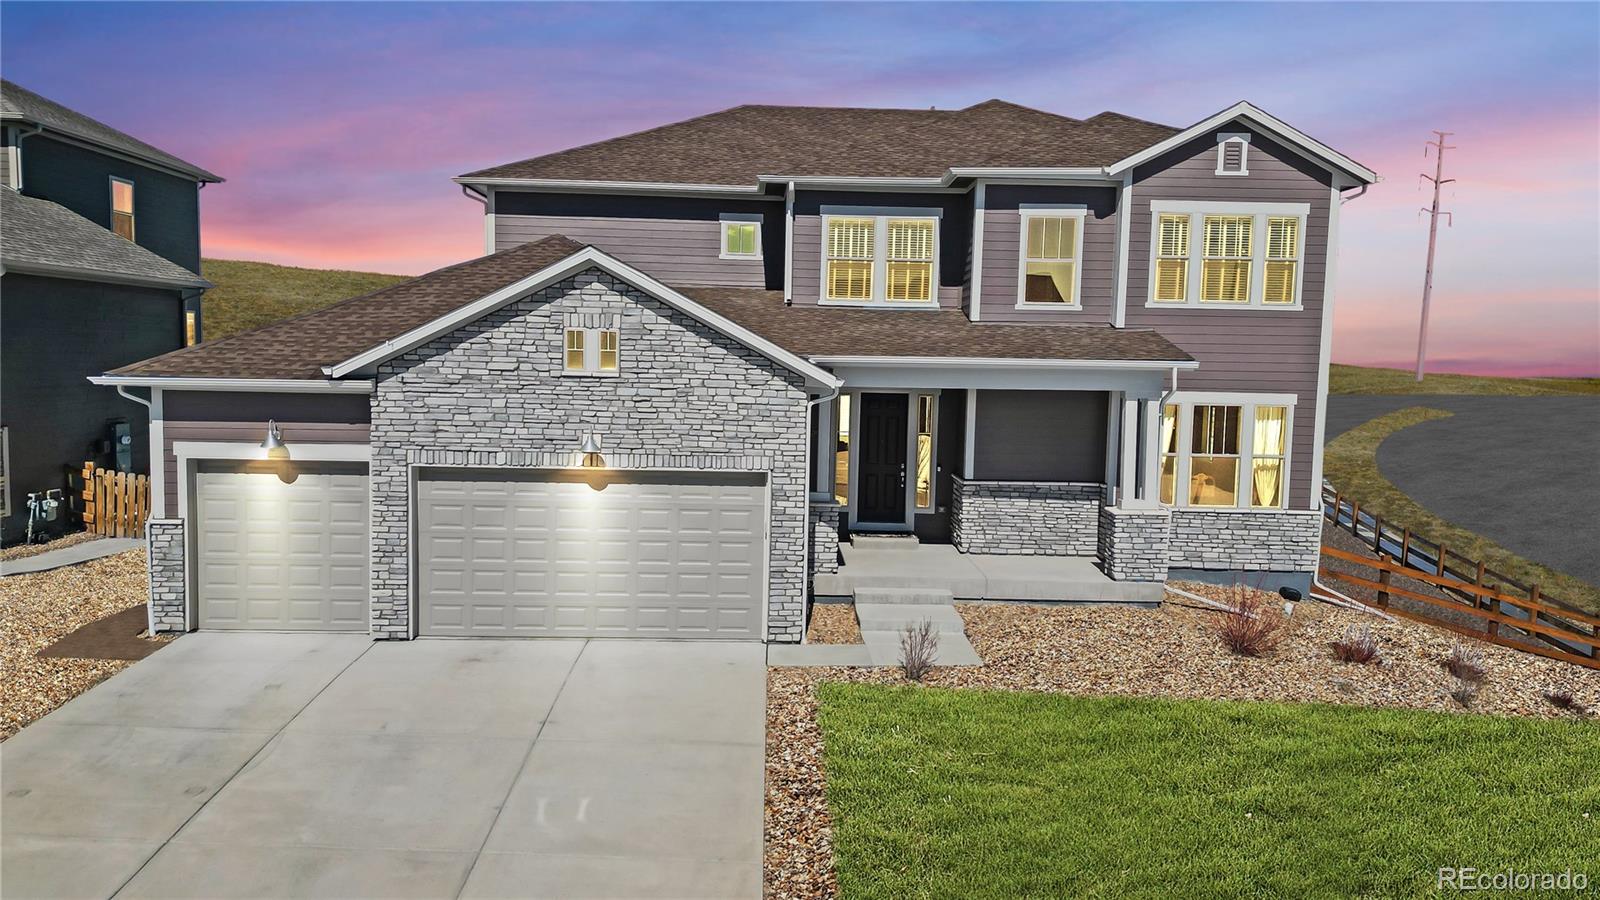 18201 W 95th Place, arvada MLS: 7758619 Beds: 4 Baths: 4 Price: $1,025,000